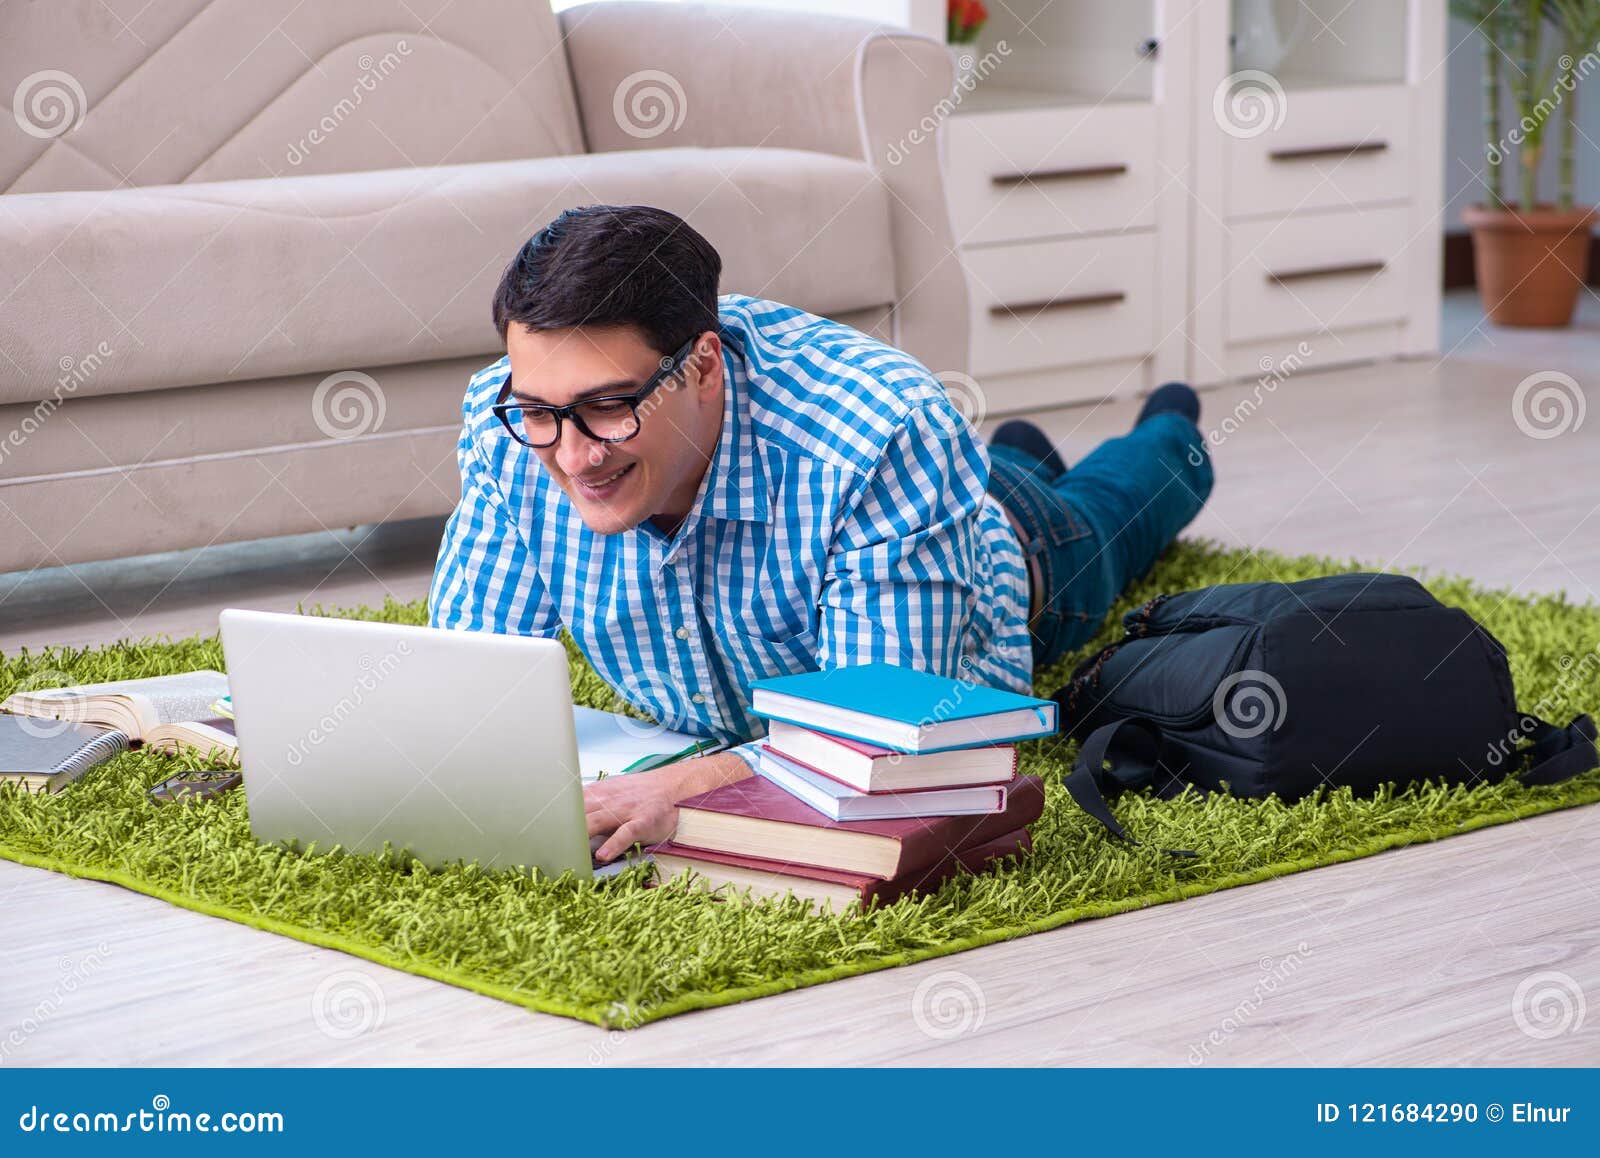 the student doing distance mba online training